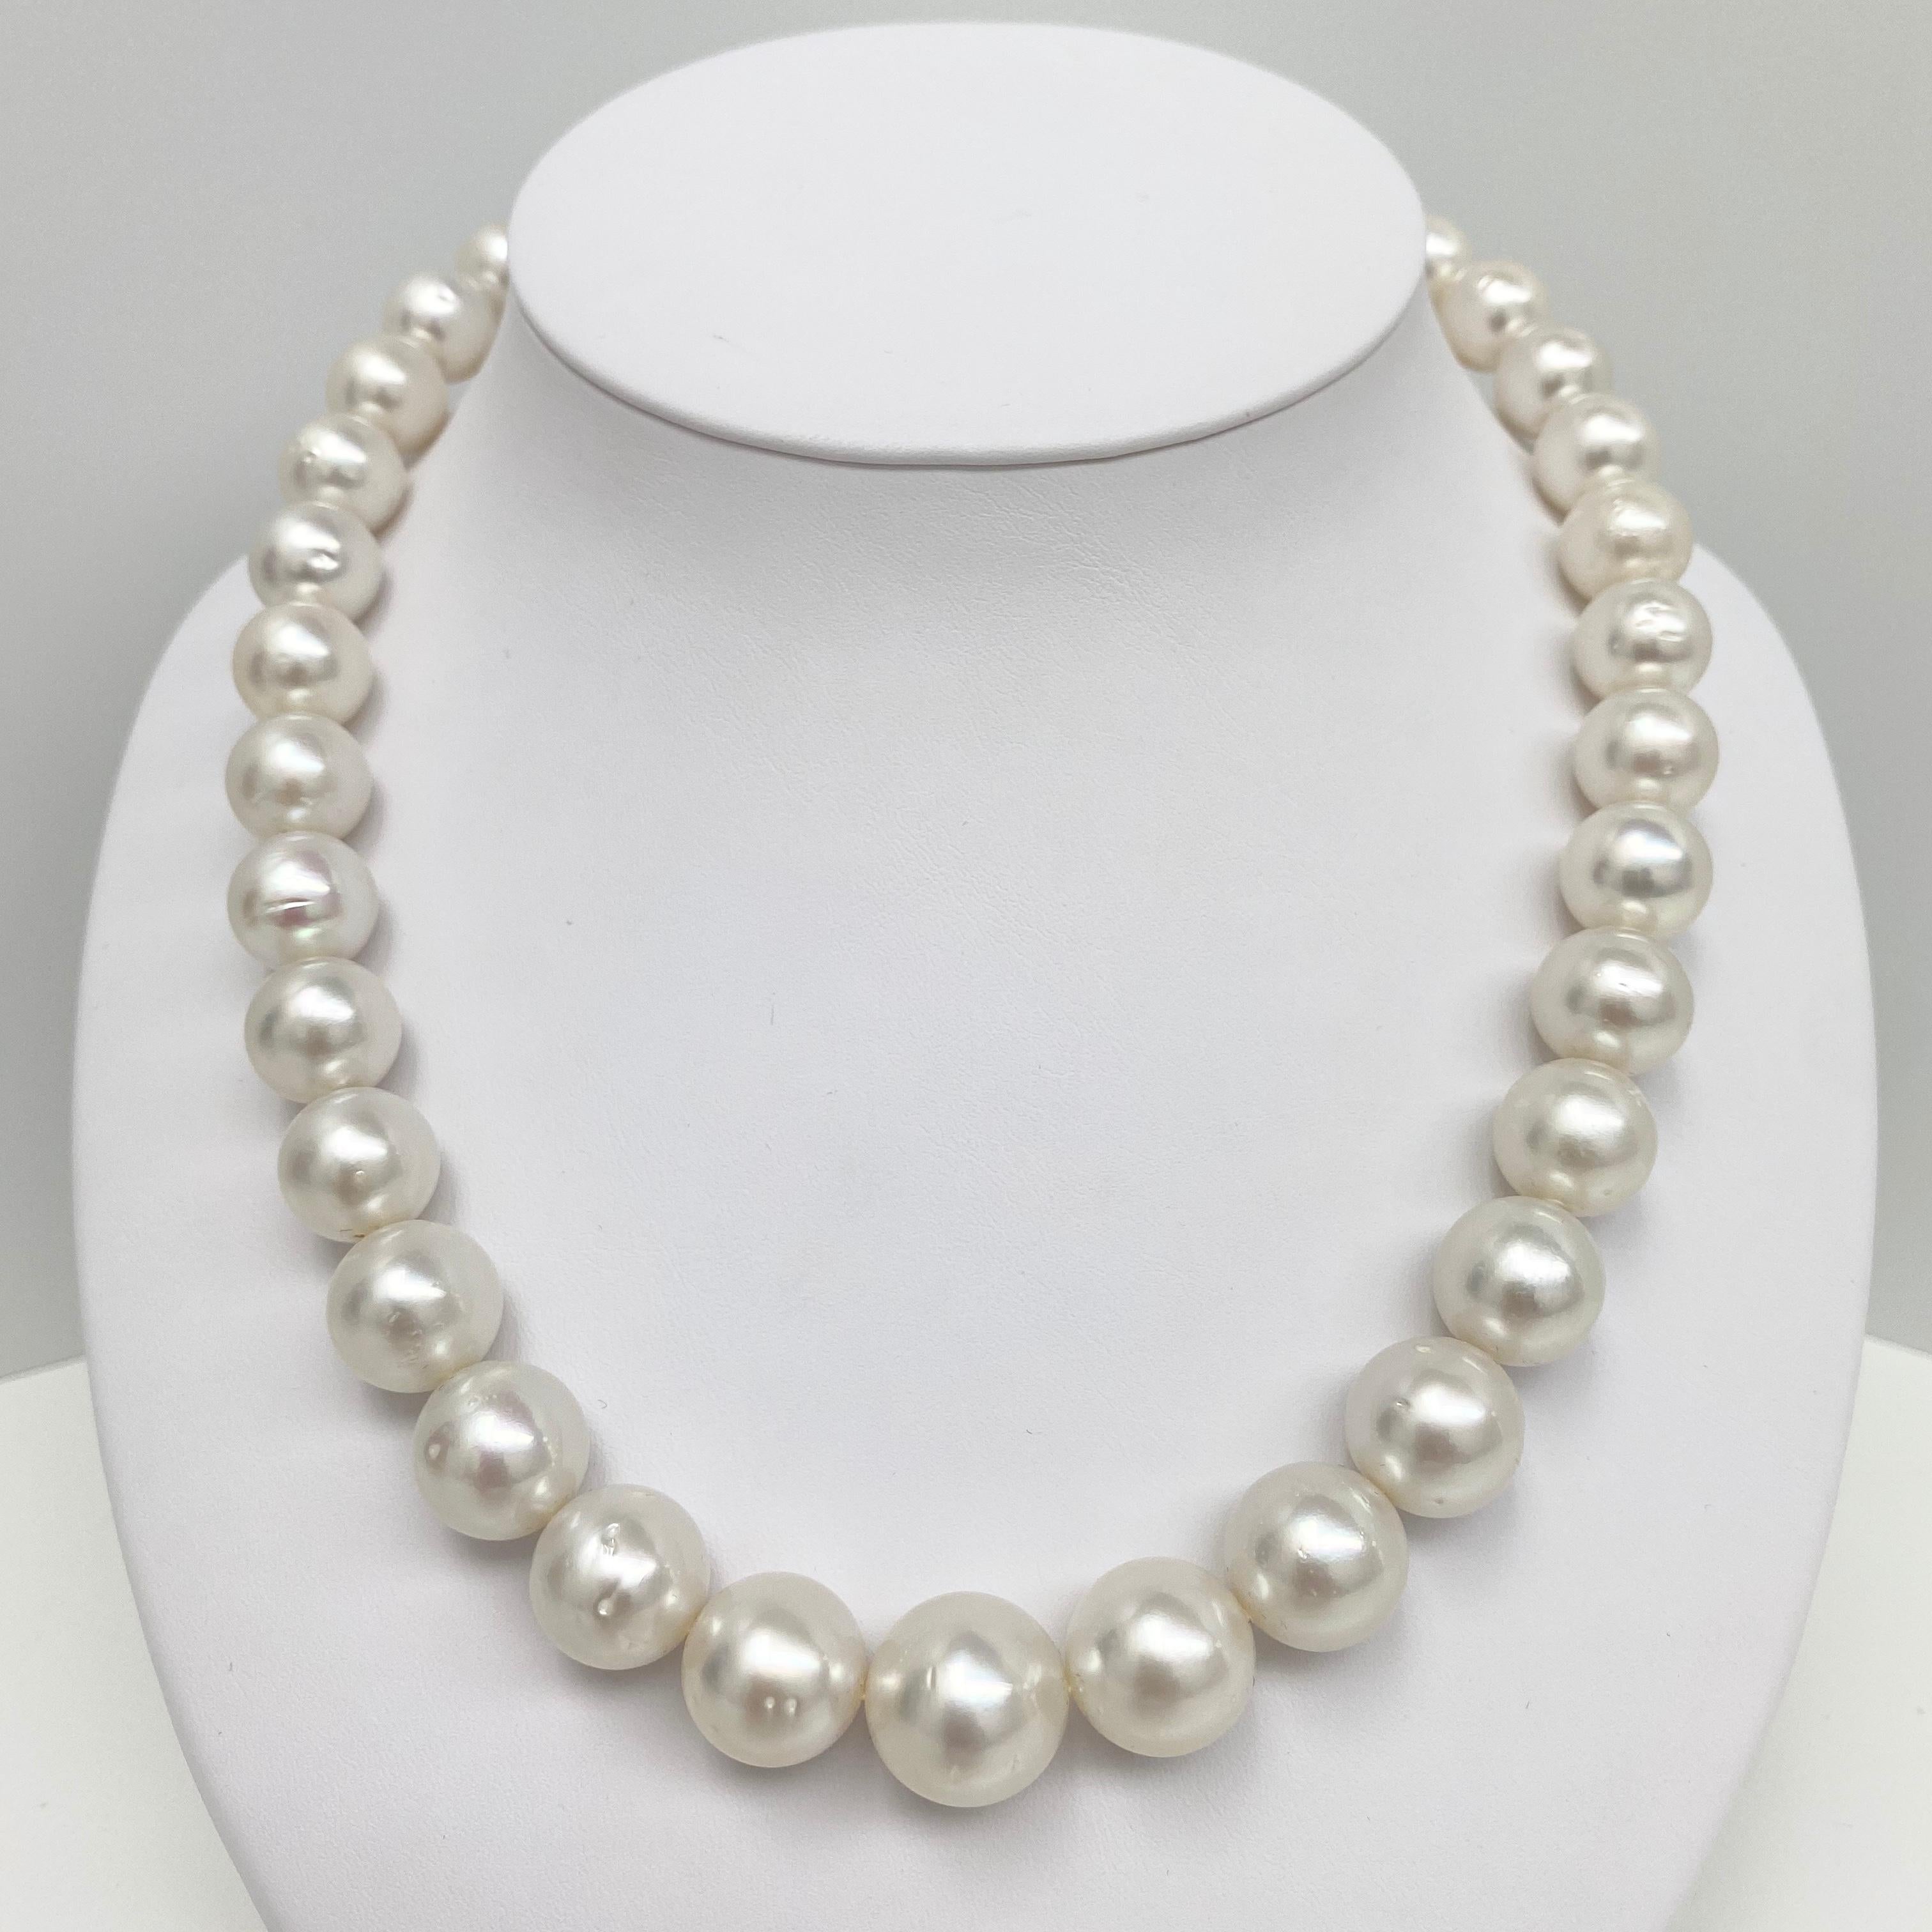 12-15mm South Sea White Near-Round Pearl Necklace with Gold Clasp
AAA Luster, South Sea White Near-Round Pearl Necklace, 18 inches hand-knotted with gold fish-hook clasp #CP78
